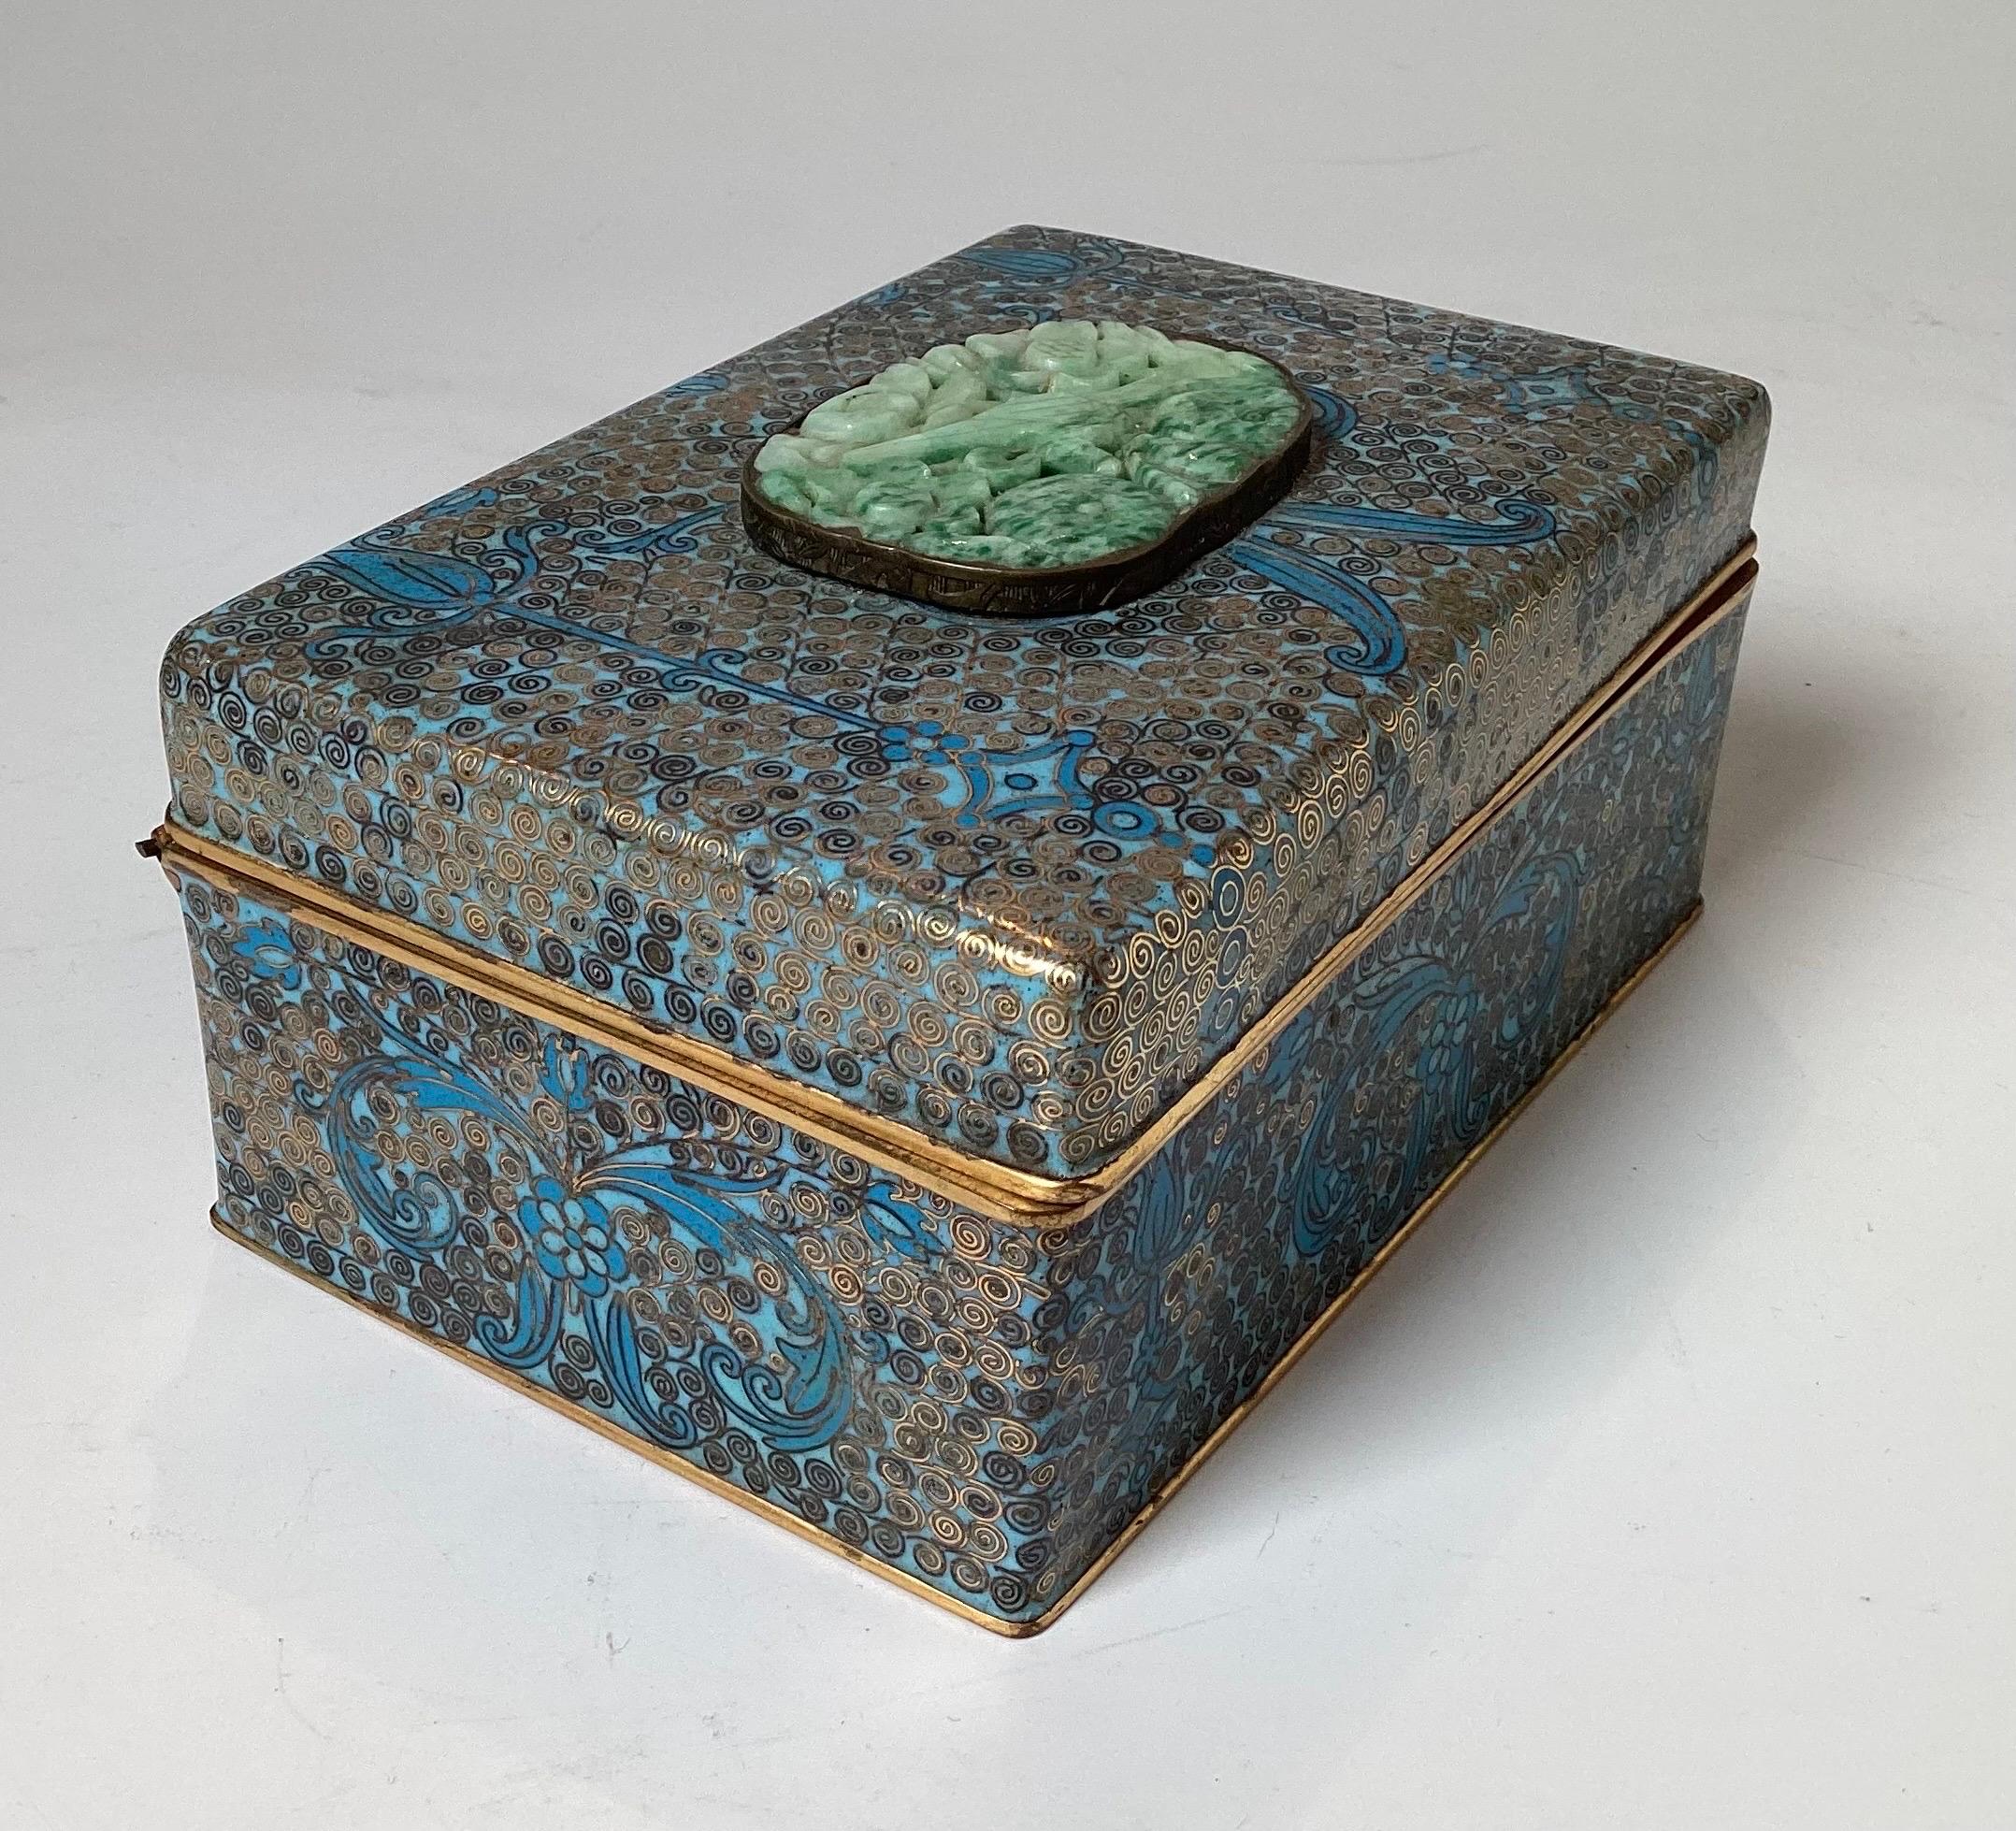 cloisonne box with lid